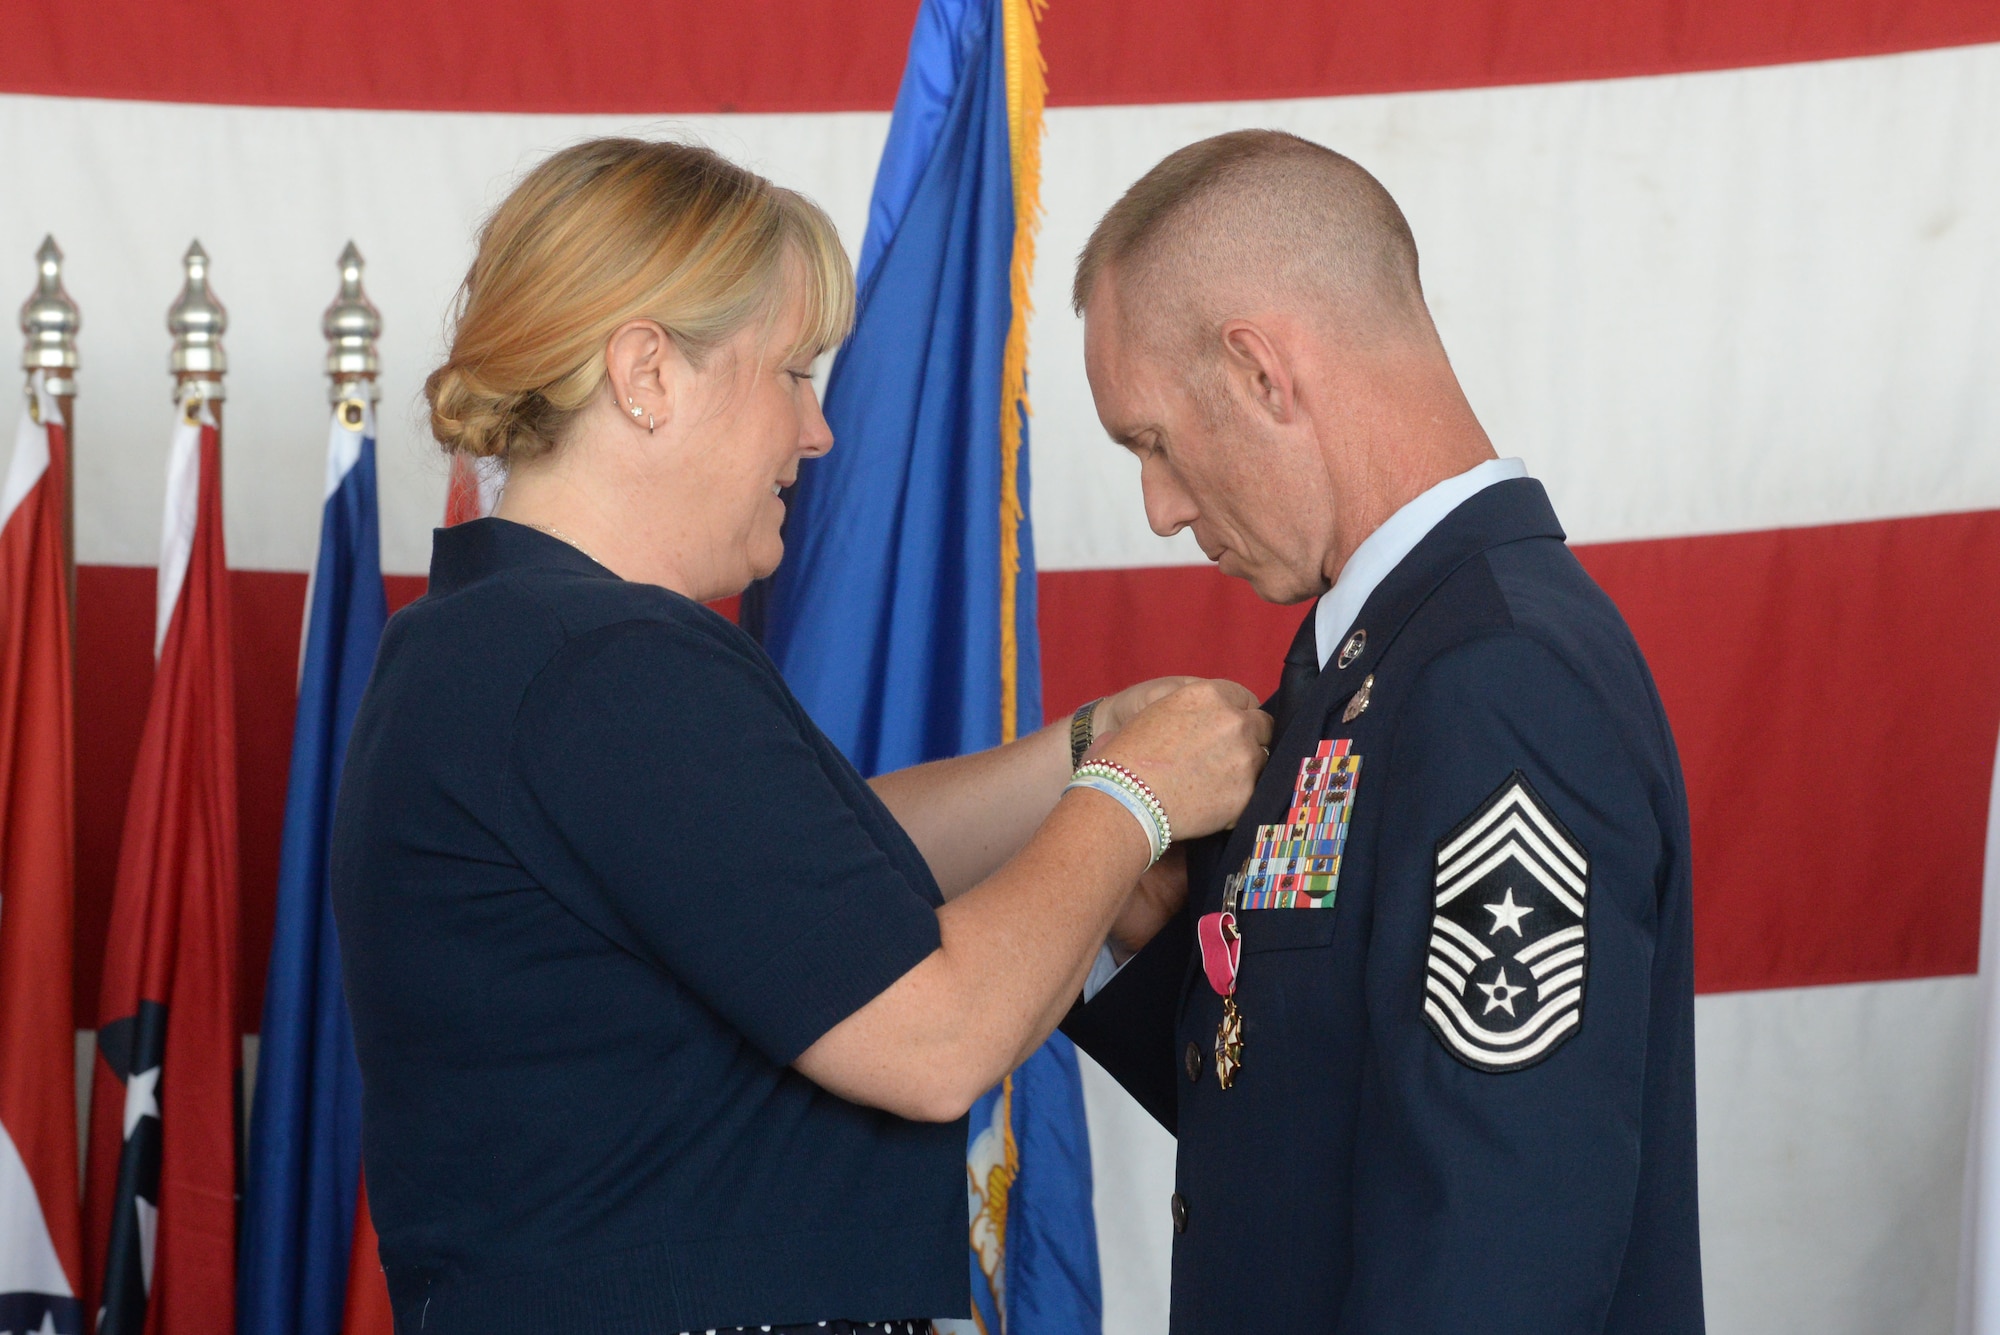 Chief Master Sgt. Geoff Weimer, accepts the retirement pin from his wife, LeAnn, at his retirement ceremony at Minot Air Force Base, N.D., June 24, 2016. Weimer retired after 29 years of service and recently served as the command chief of the 5th Bomb Wing. (U.S. Air Force photo/Airman 1st Class Jessica Weissman)